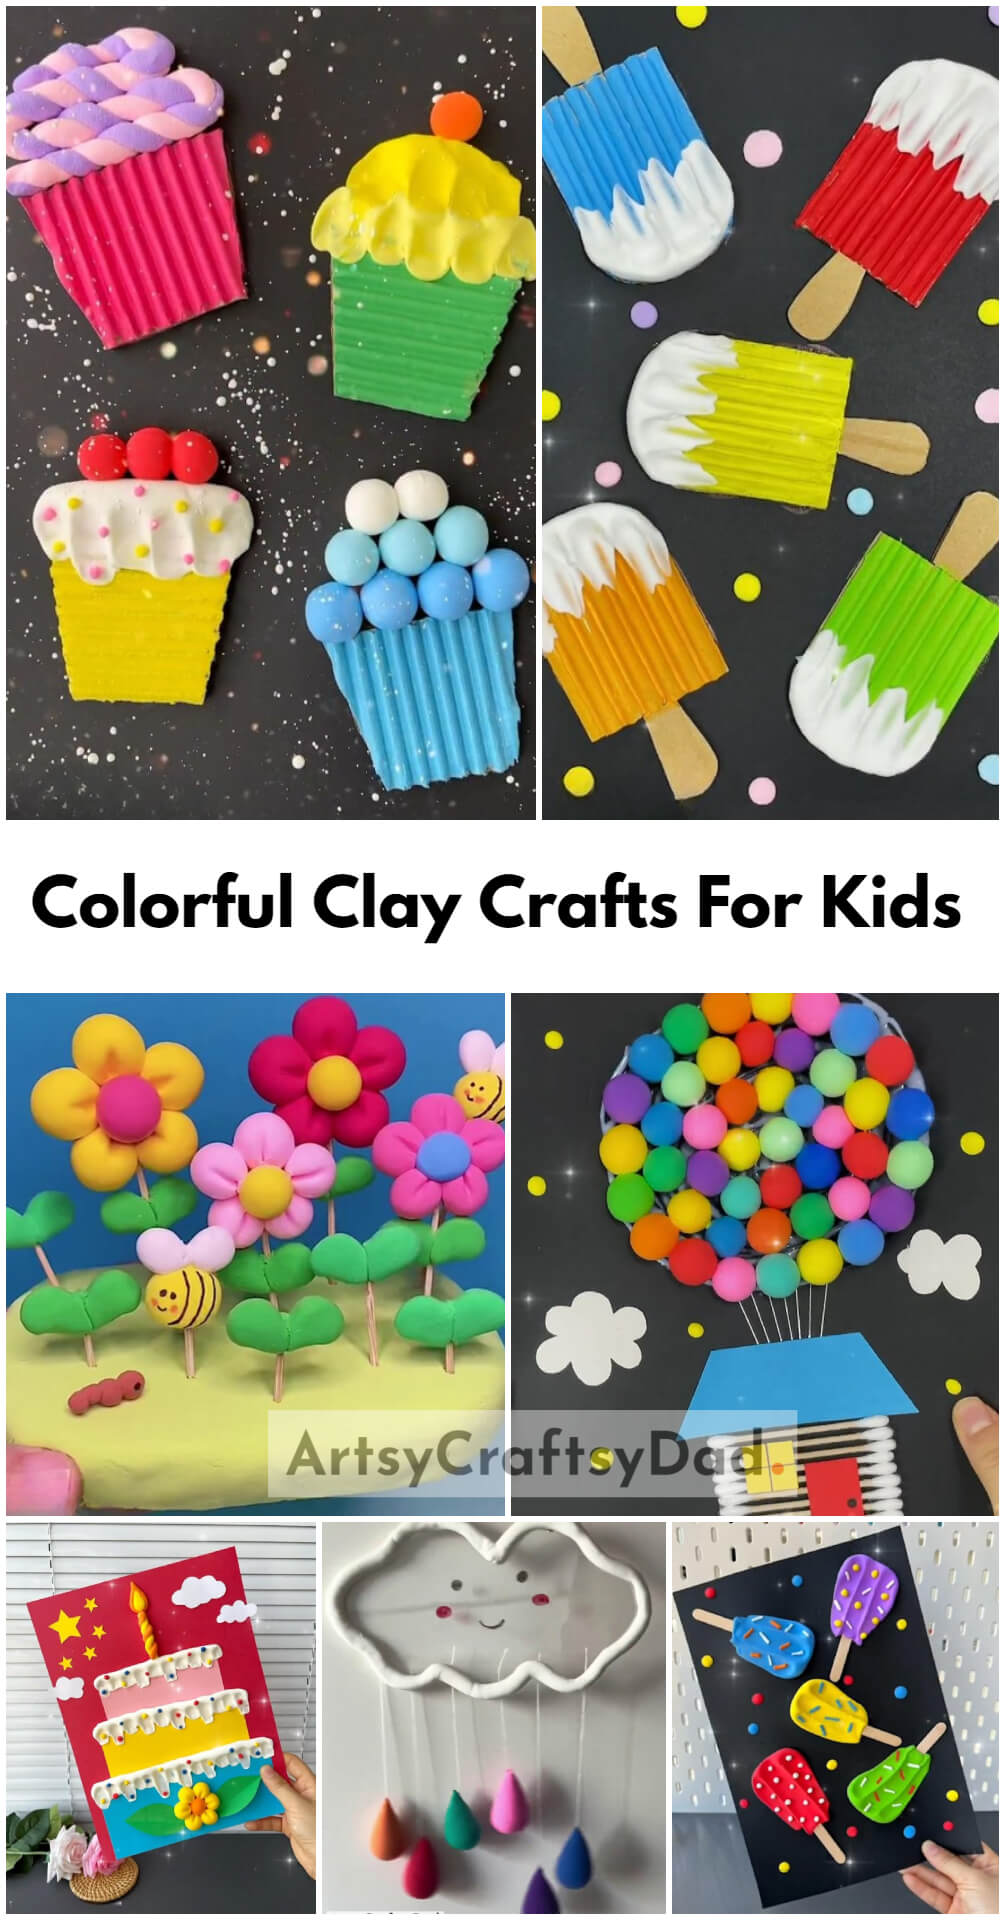 Colorful Clay Crafts For Kids